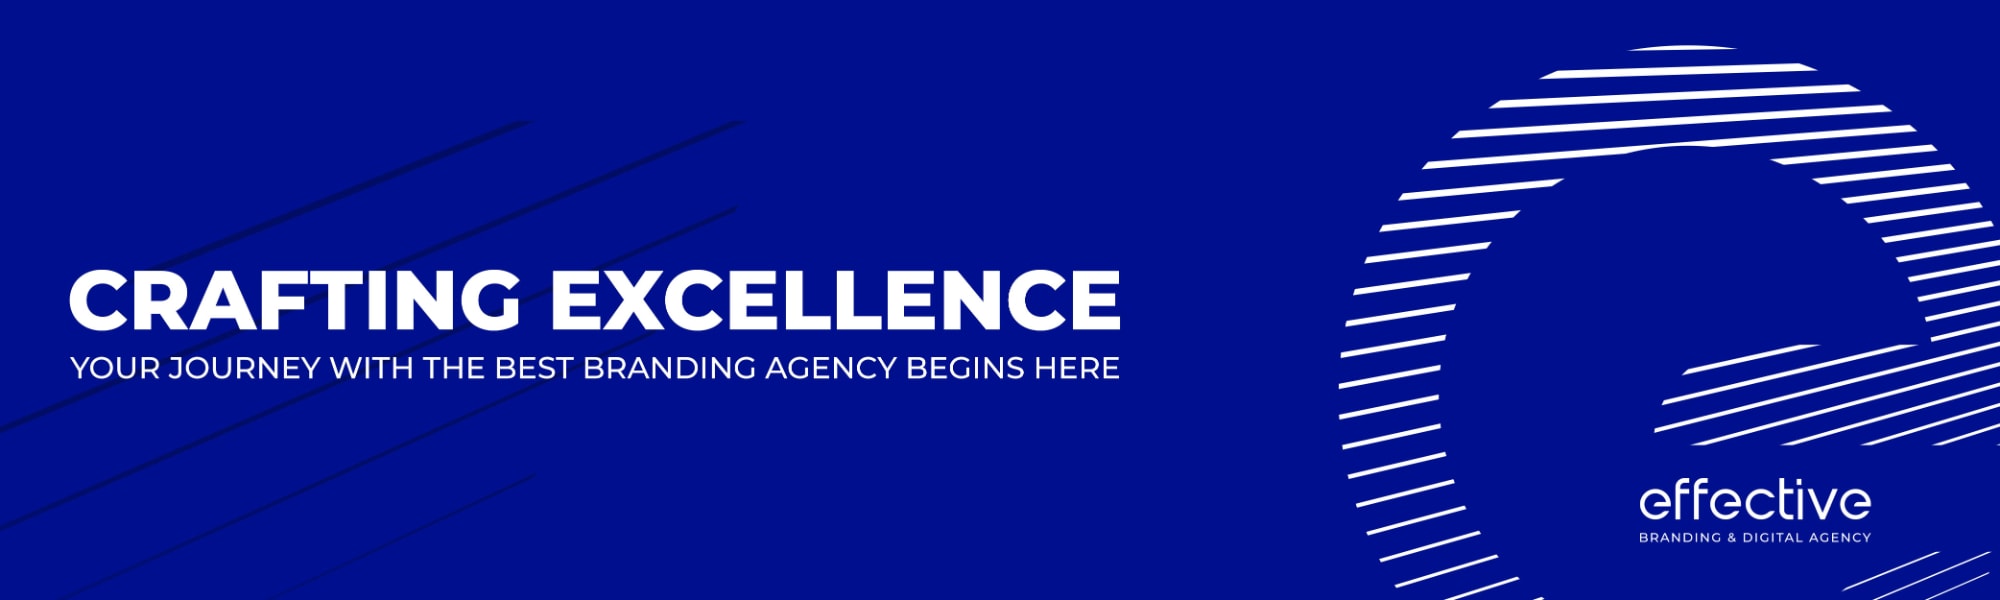 Crafting Excellence Your Journey with the Best Branding Agency Begins Here